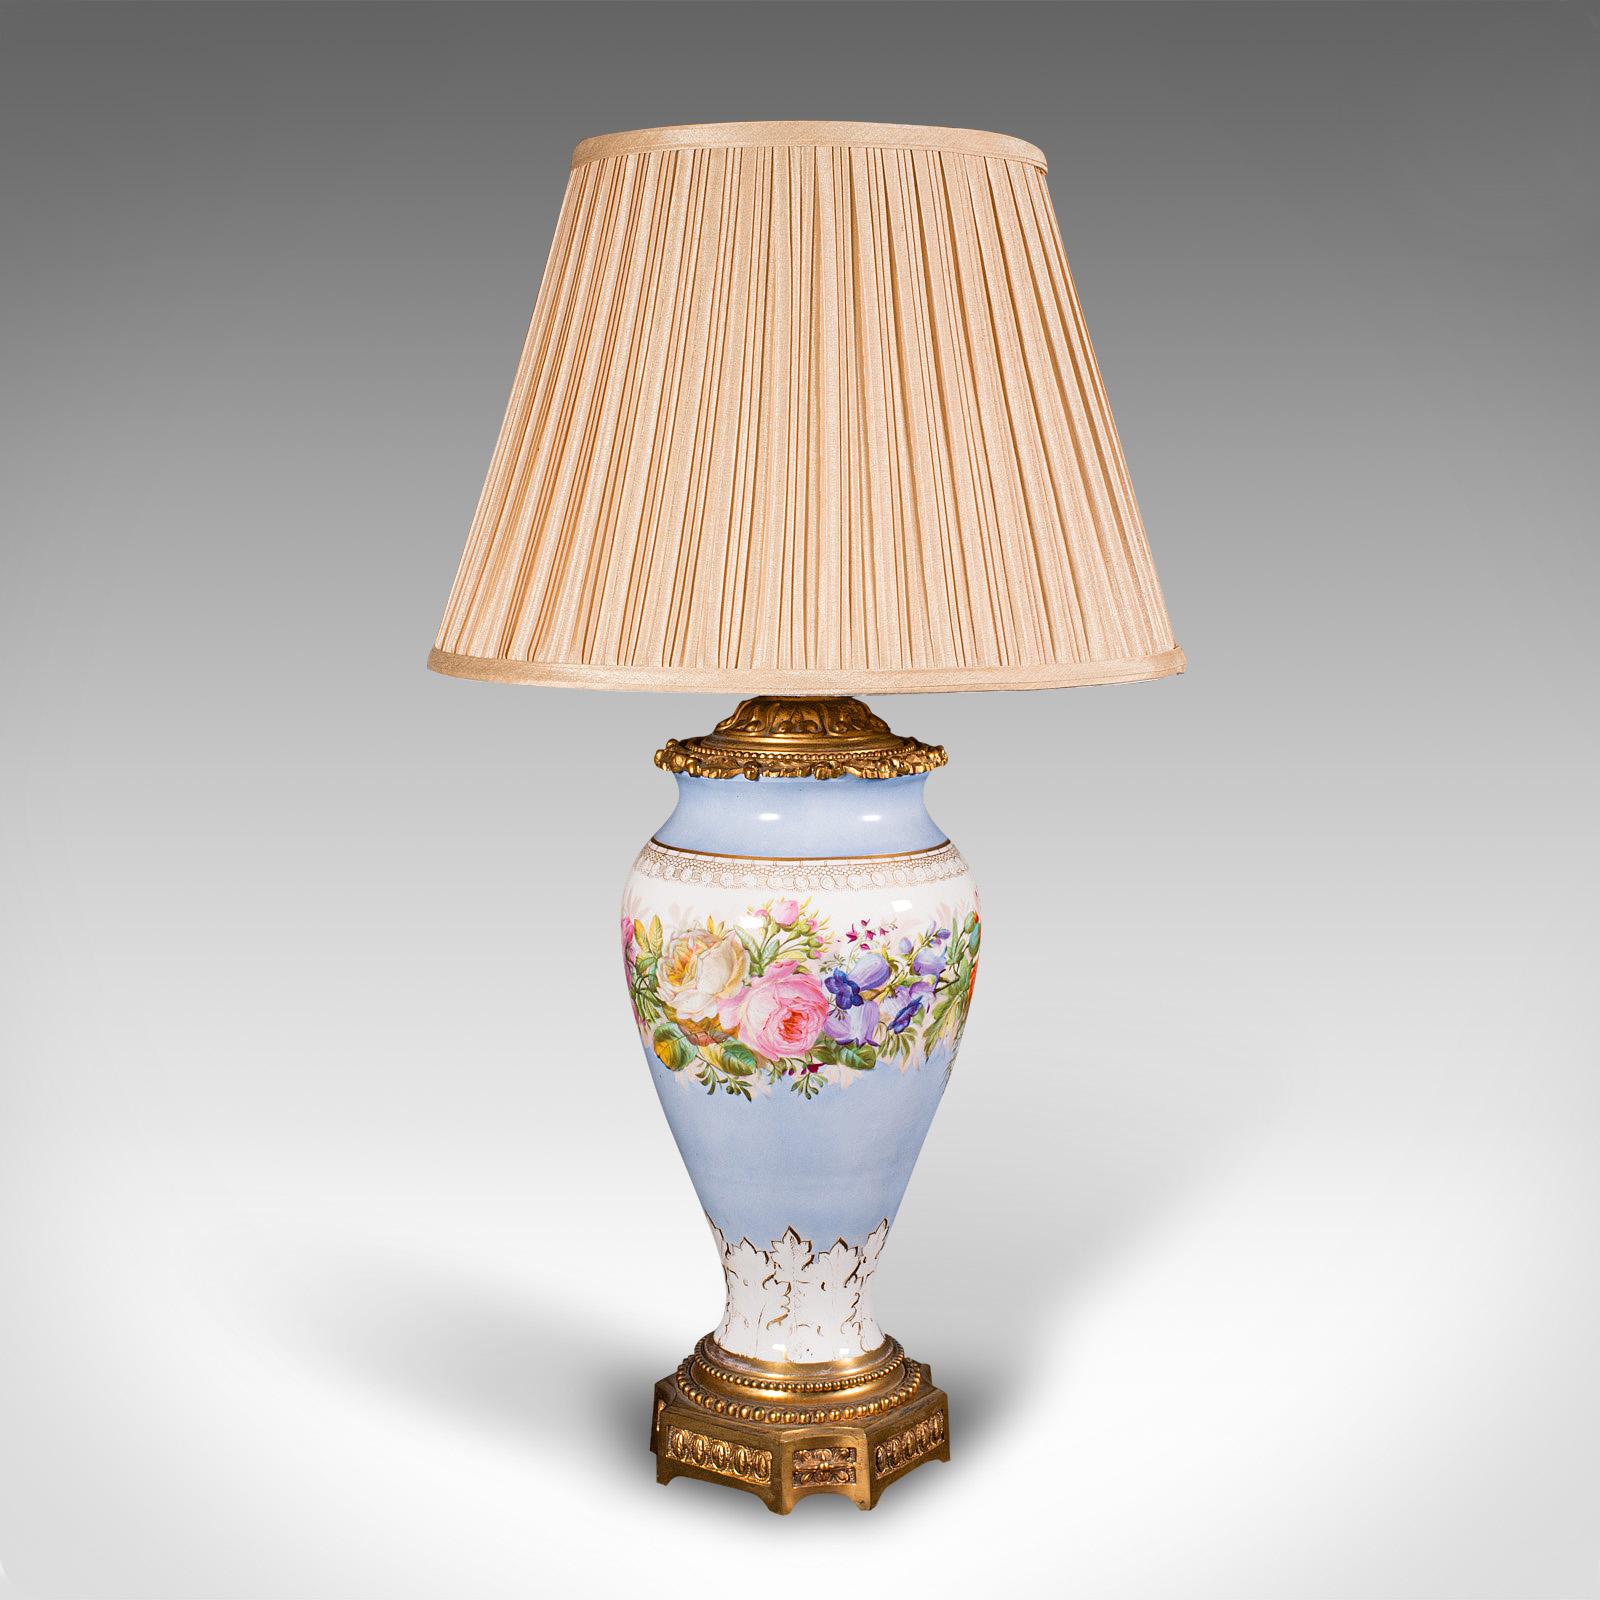 
This is a vintage cafe lamp. A French, ceramic and gilt cast metal decorative table light, dating to the early 20th century, circa 1930.

Fine table lamp with a colourful foliate appearance
Displays a desirable aged patina and in good order
Quality